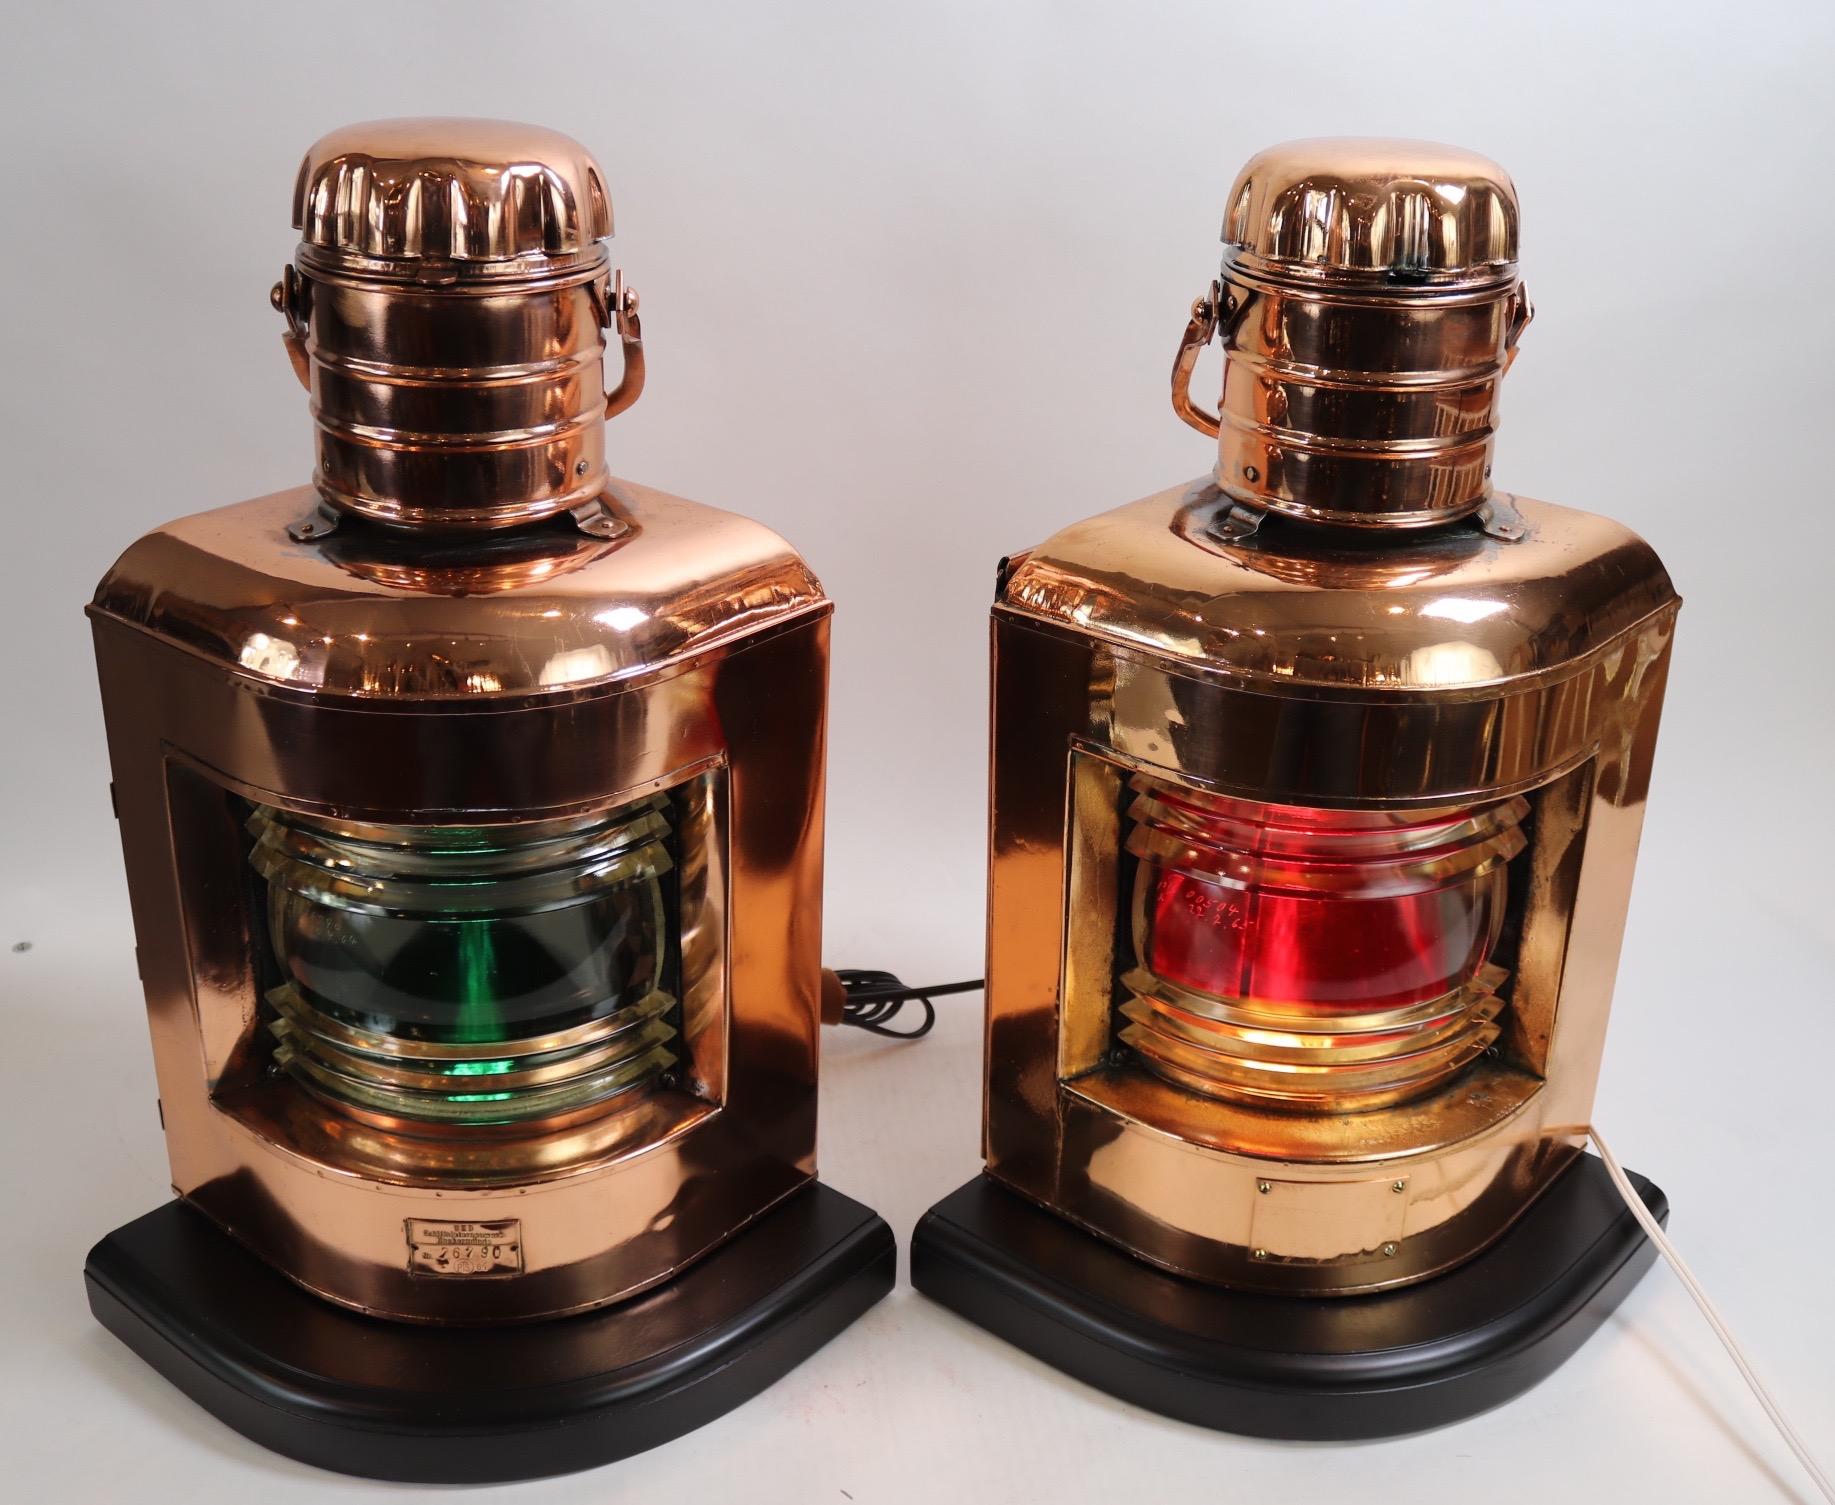 Pair of highly polished and lacquered port and starboard ships lanterns with glass fresnel lenses, vented tops, mounted to thick wood bases and new wiring and sockets for home display. Weight is 32 pounds.